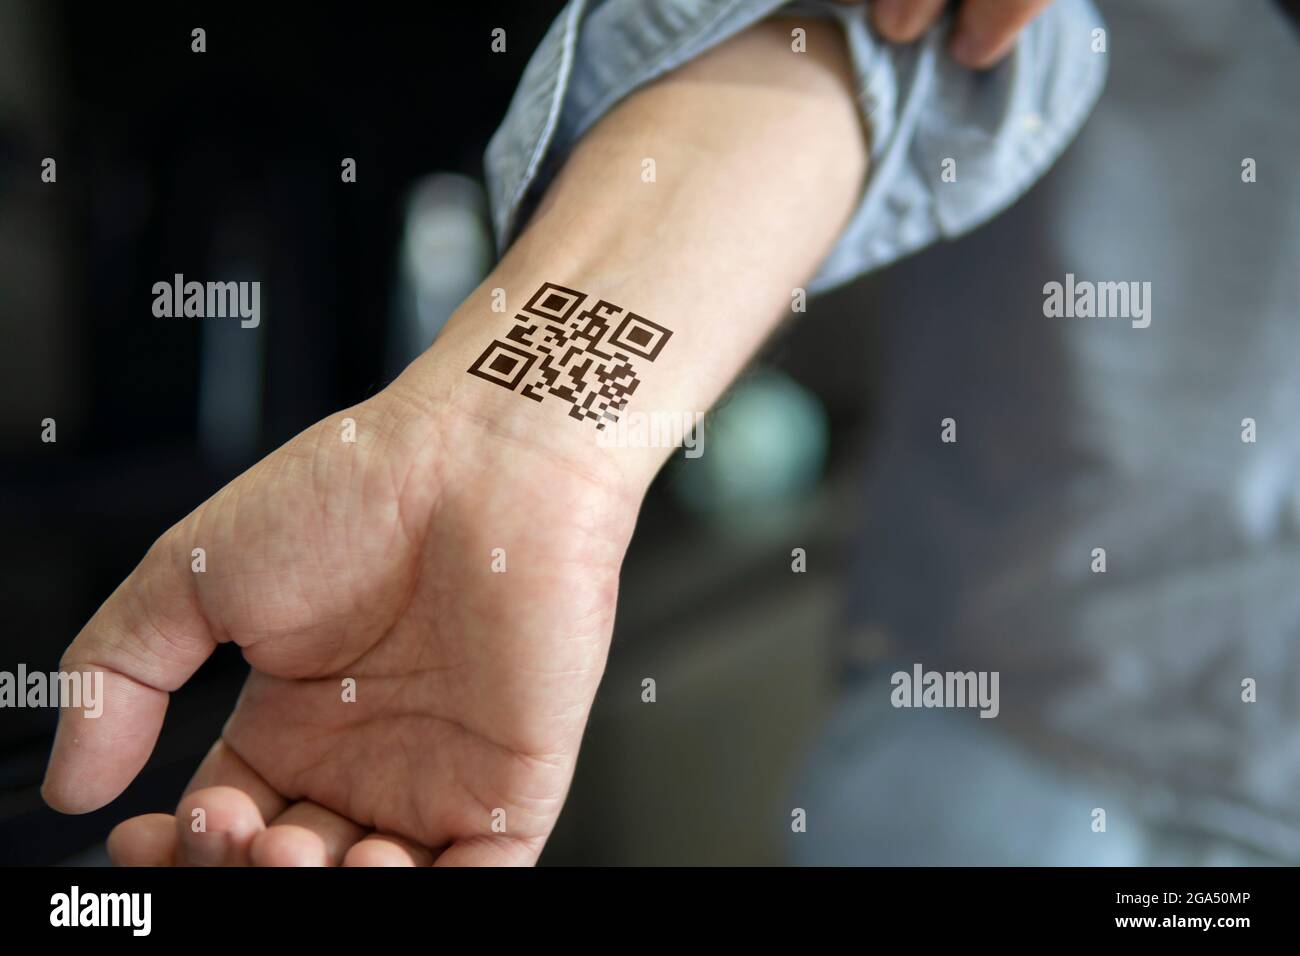 the man shows his hand with a qr code a confirmation of the vaccination against the covid 19 coronavirus temporary tattoo on wrist carpus 2GA50MP